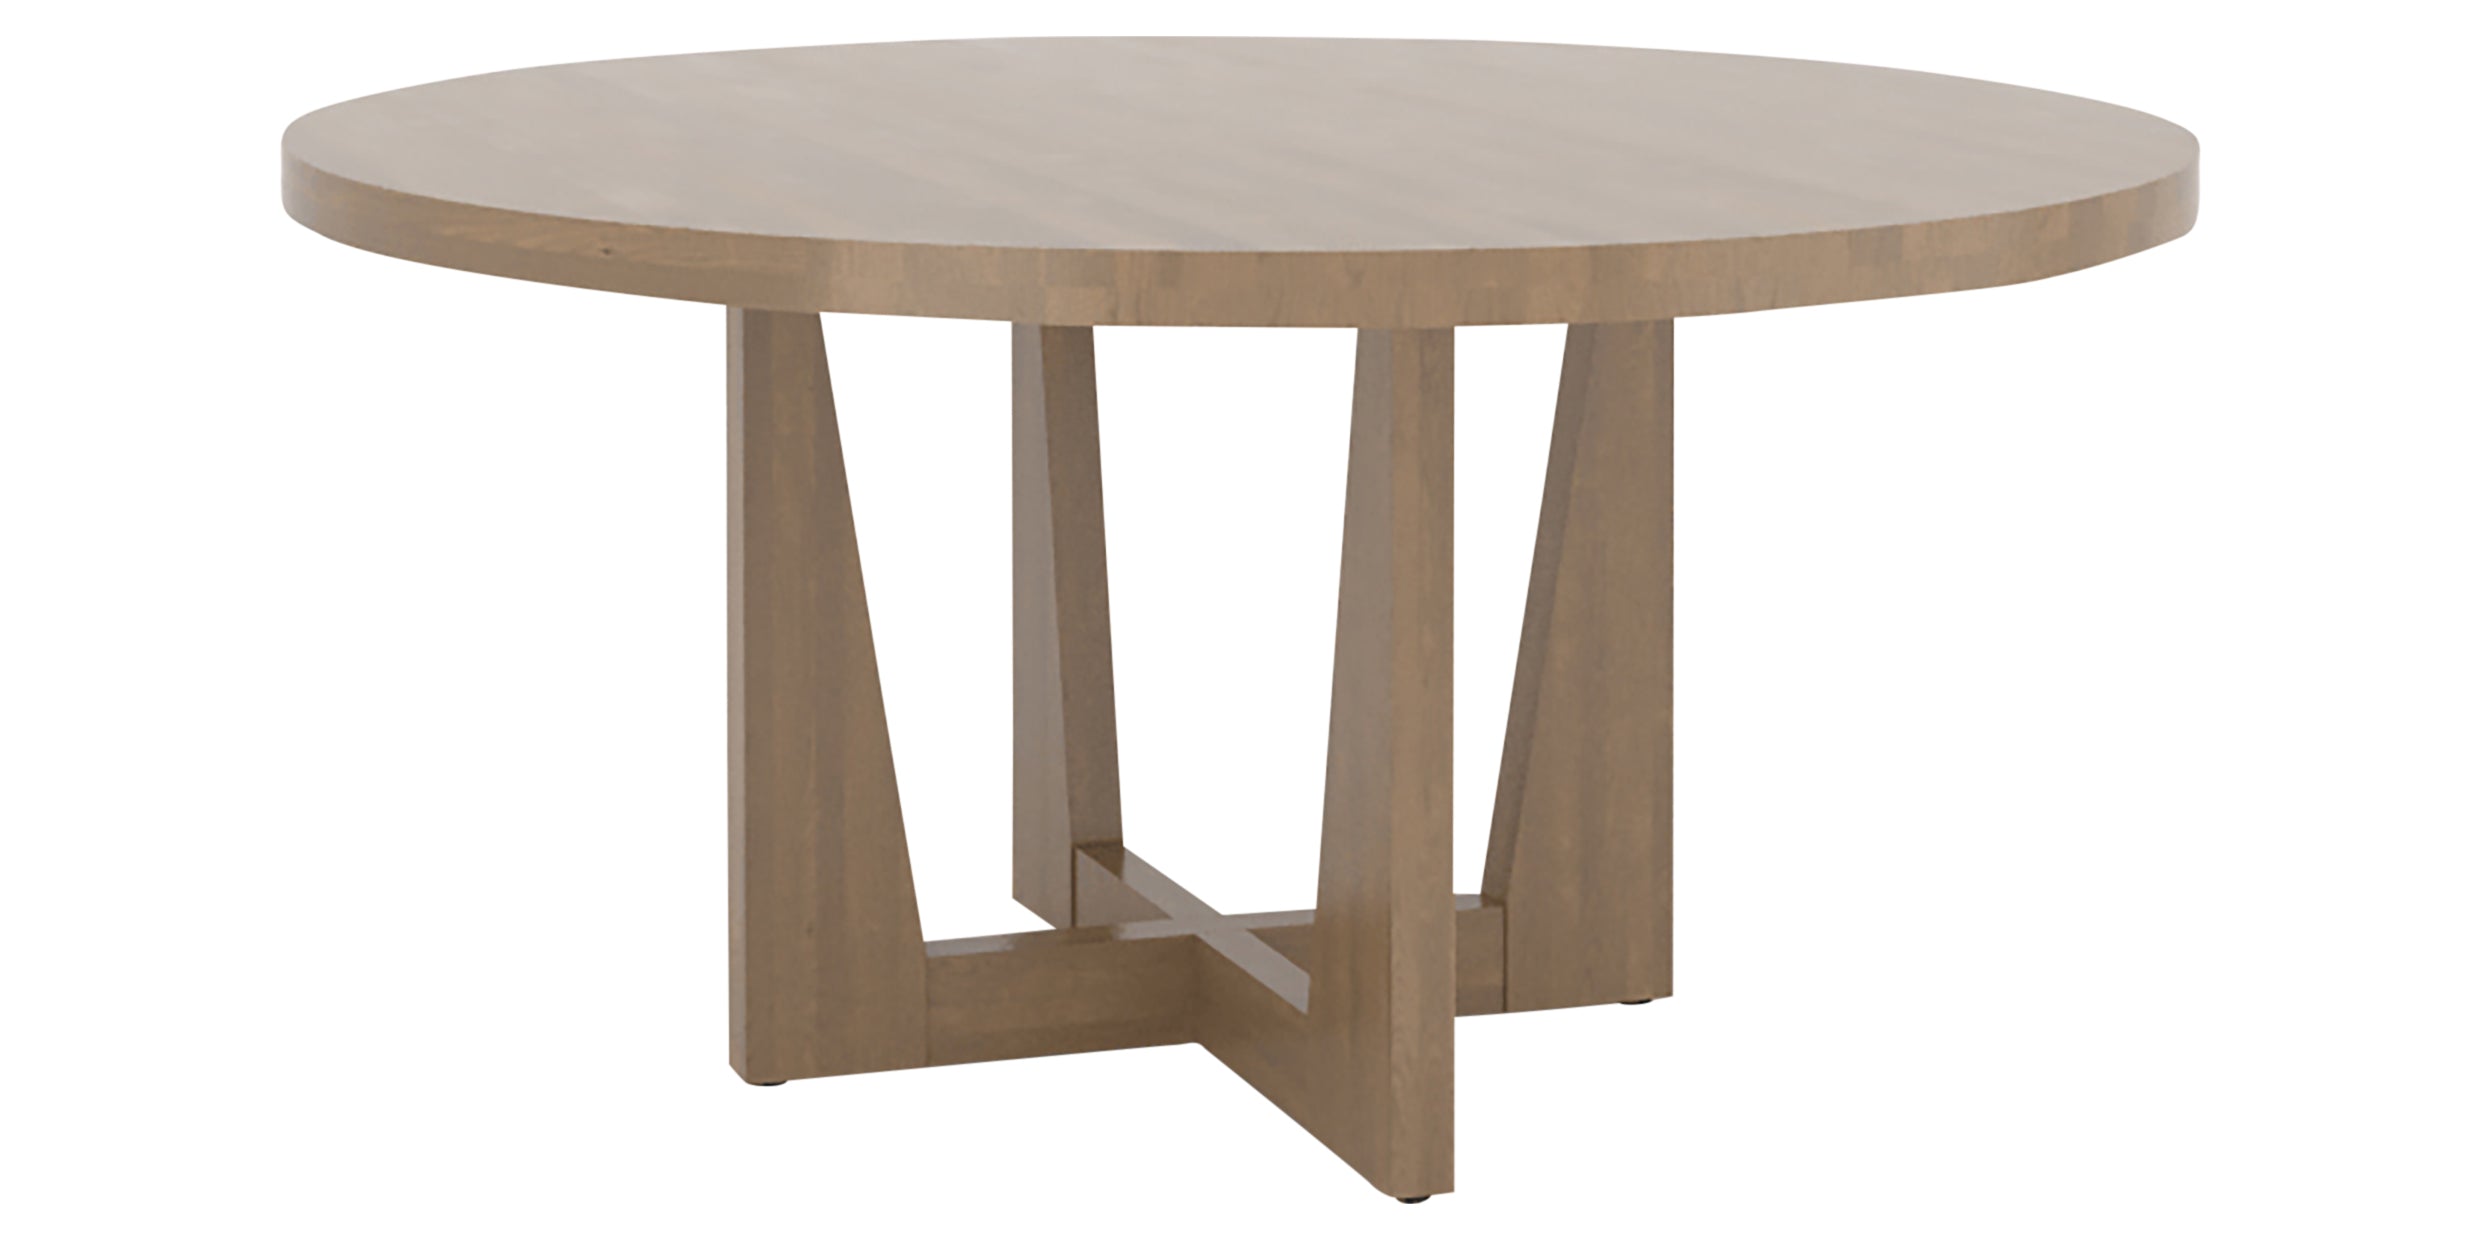 Large Size | Canadel Modern 5454 Dining Table with MK Base | Valley Ridge Furniture